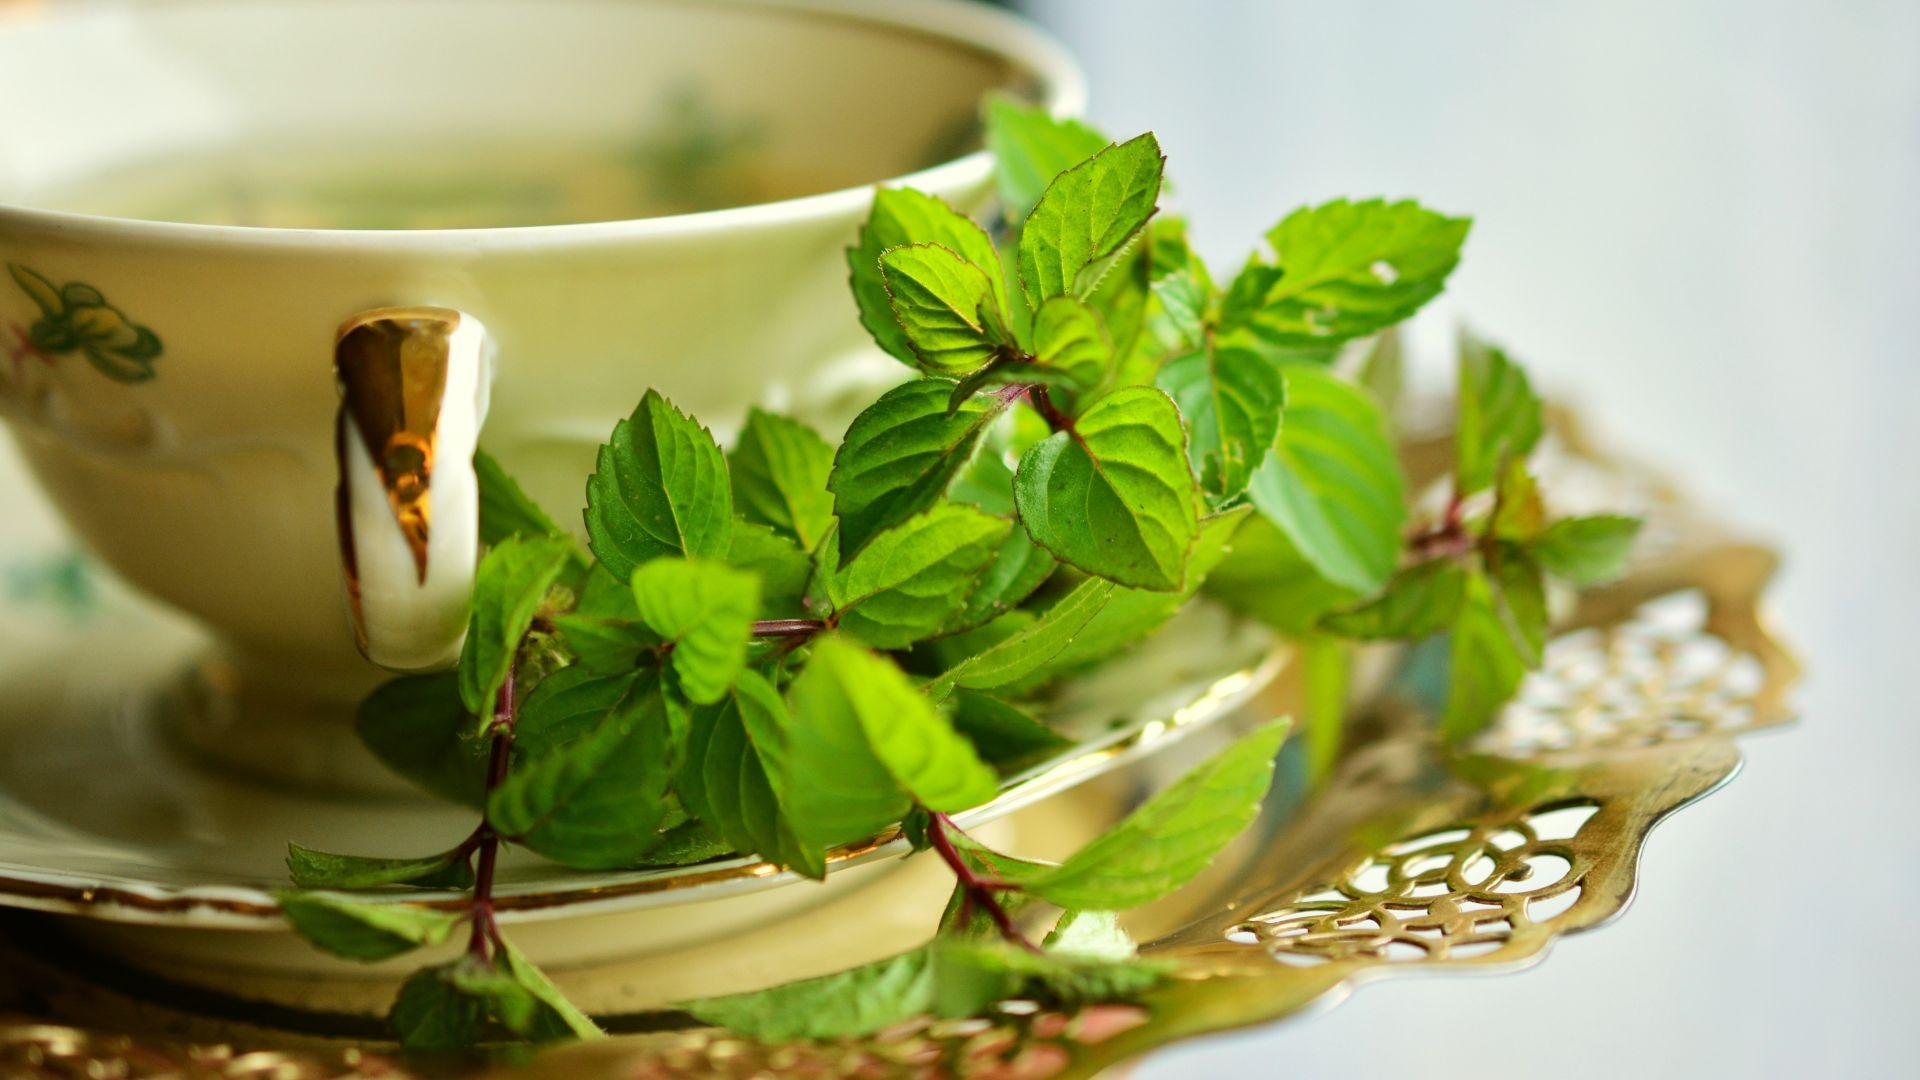 Peppermint leaves tea cup, HD image, Picture background, Refreshing drink, 1920x1080 Full HD Desktop